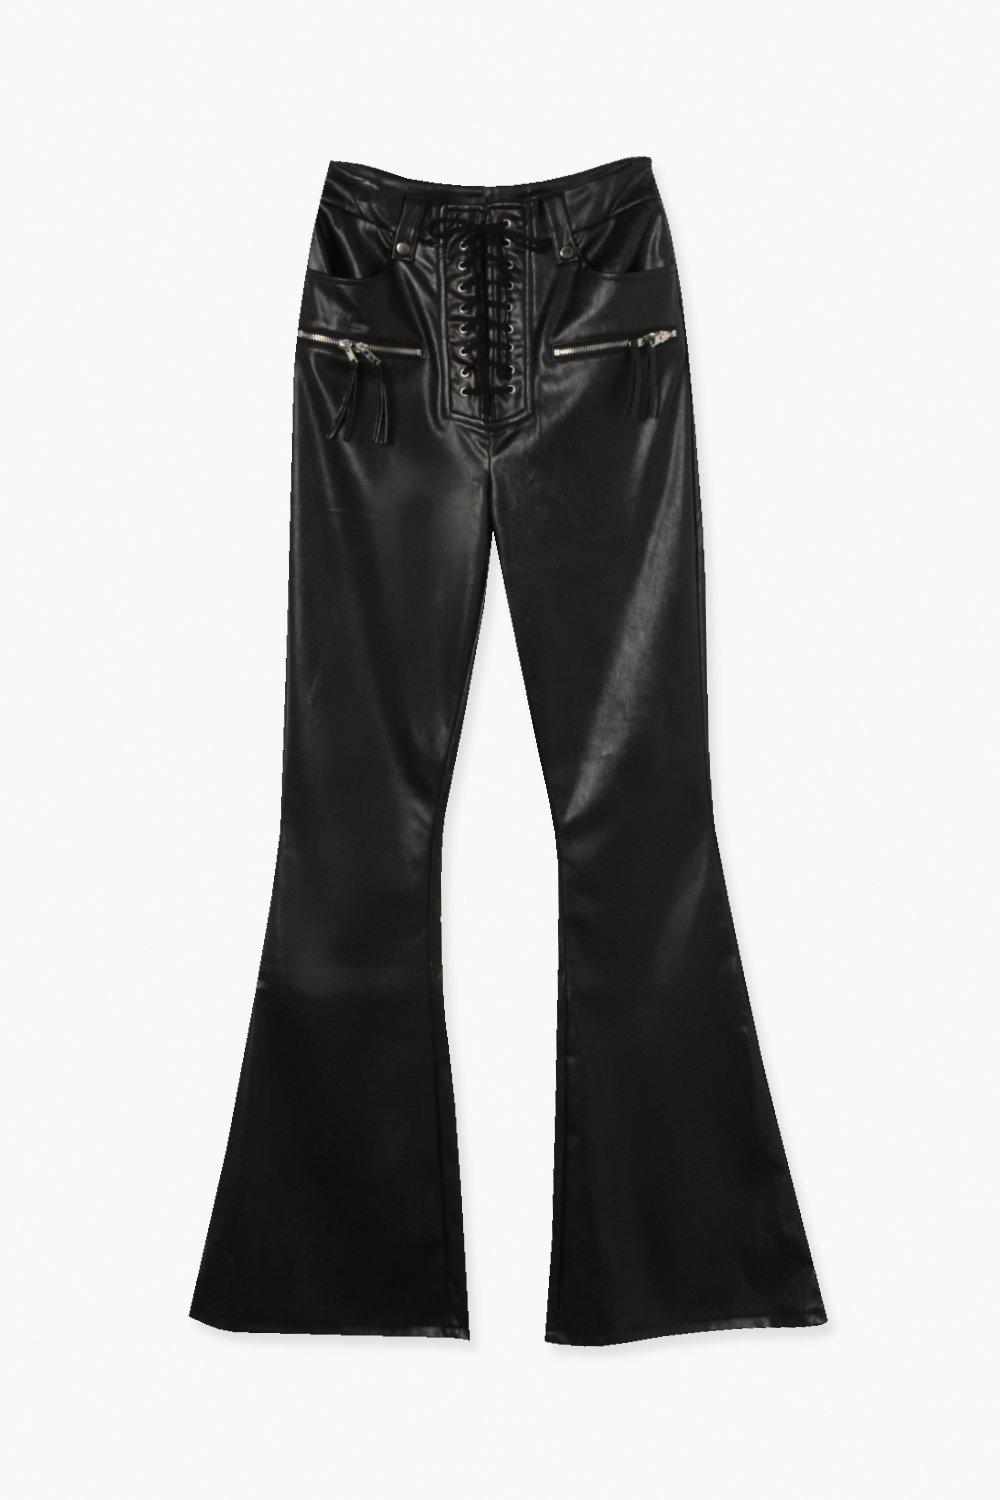 Women's Biker Lace Up Leather Look Flared Trousers